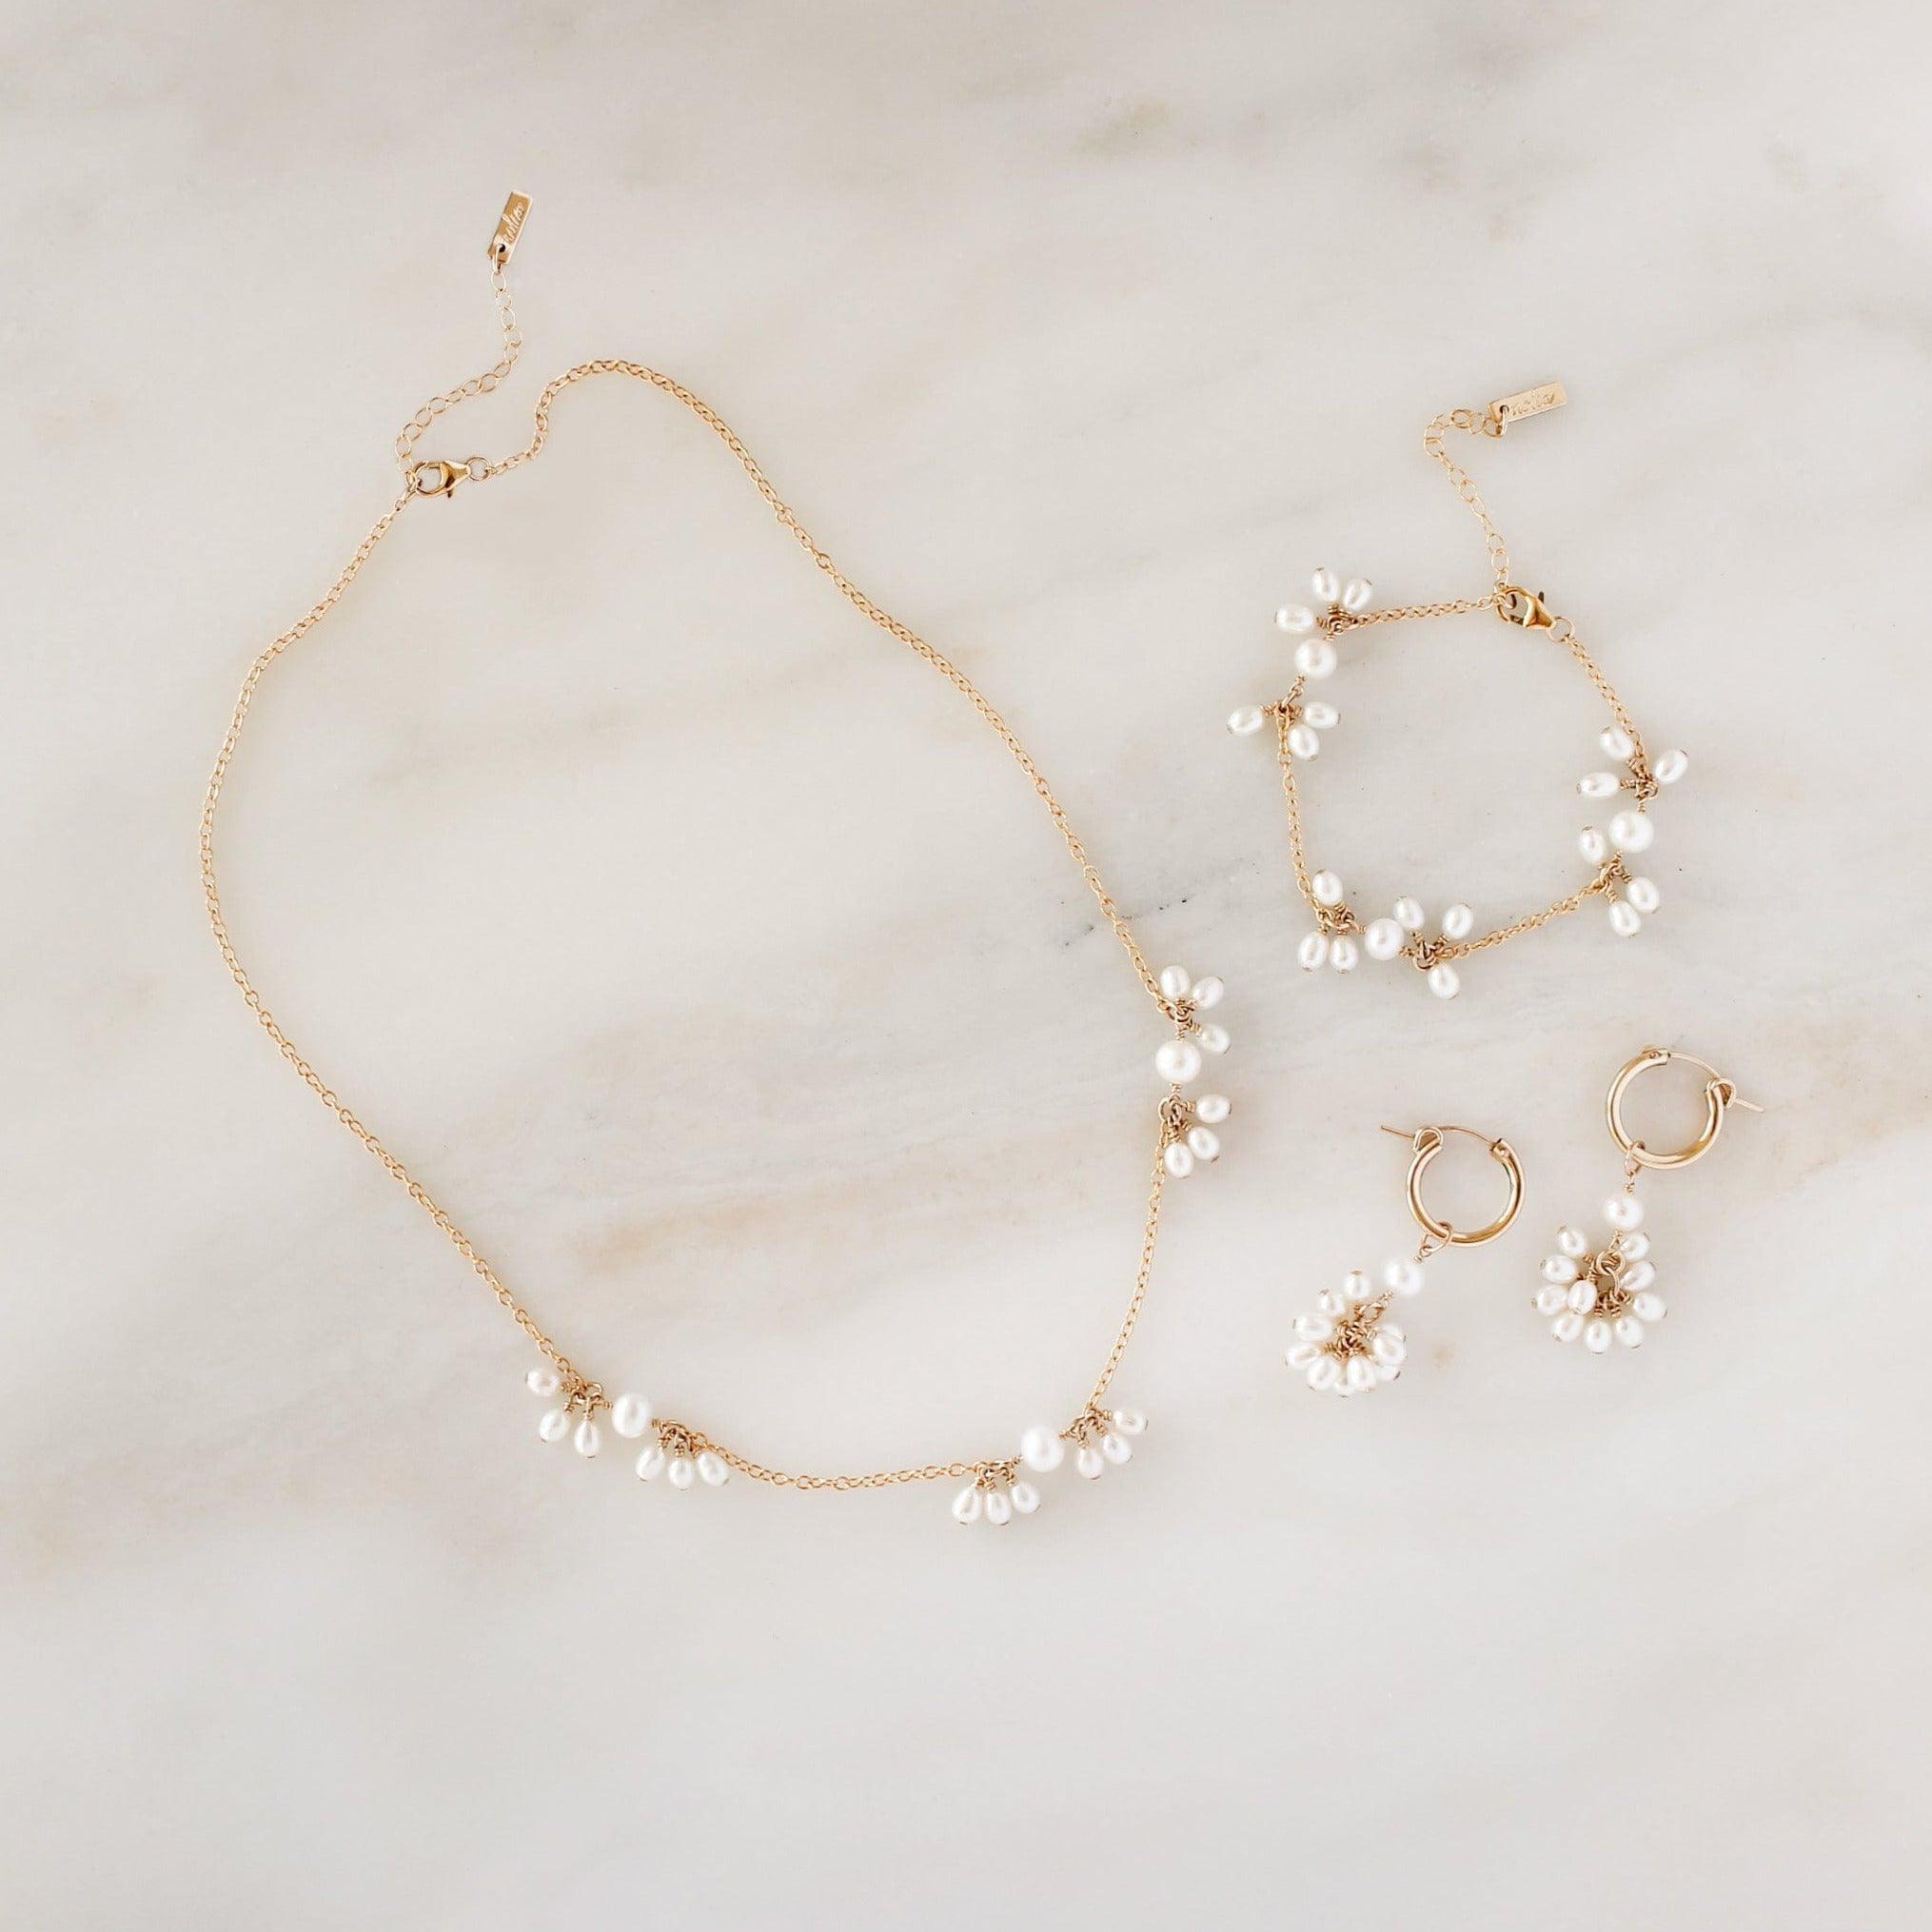 Pearl Blossom Hoop Earrings - Nolia Jewelry - Meaningful + Sustainably Handcrafted Jewelry